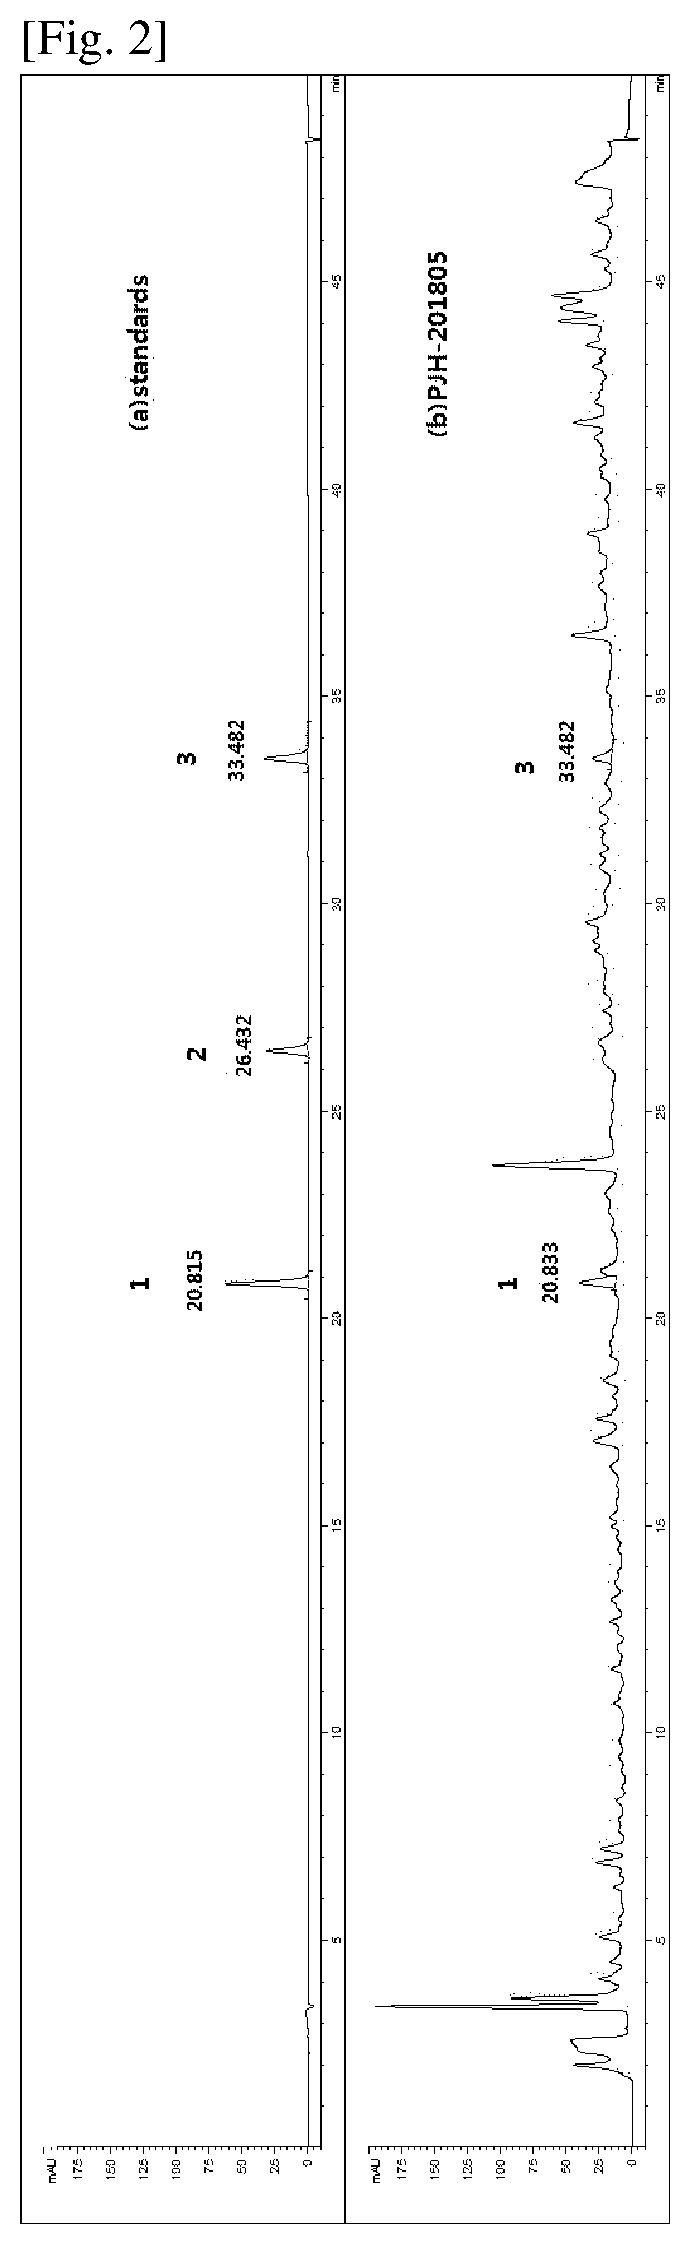 Composition comprising combination of red clover extract and hops extract for improvement of menopausal disorder